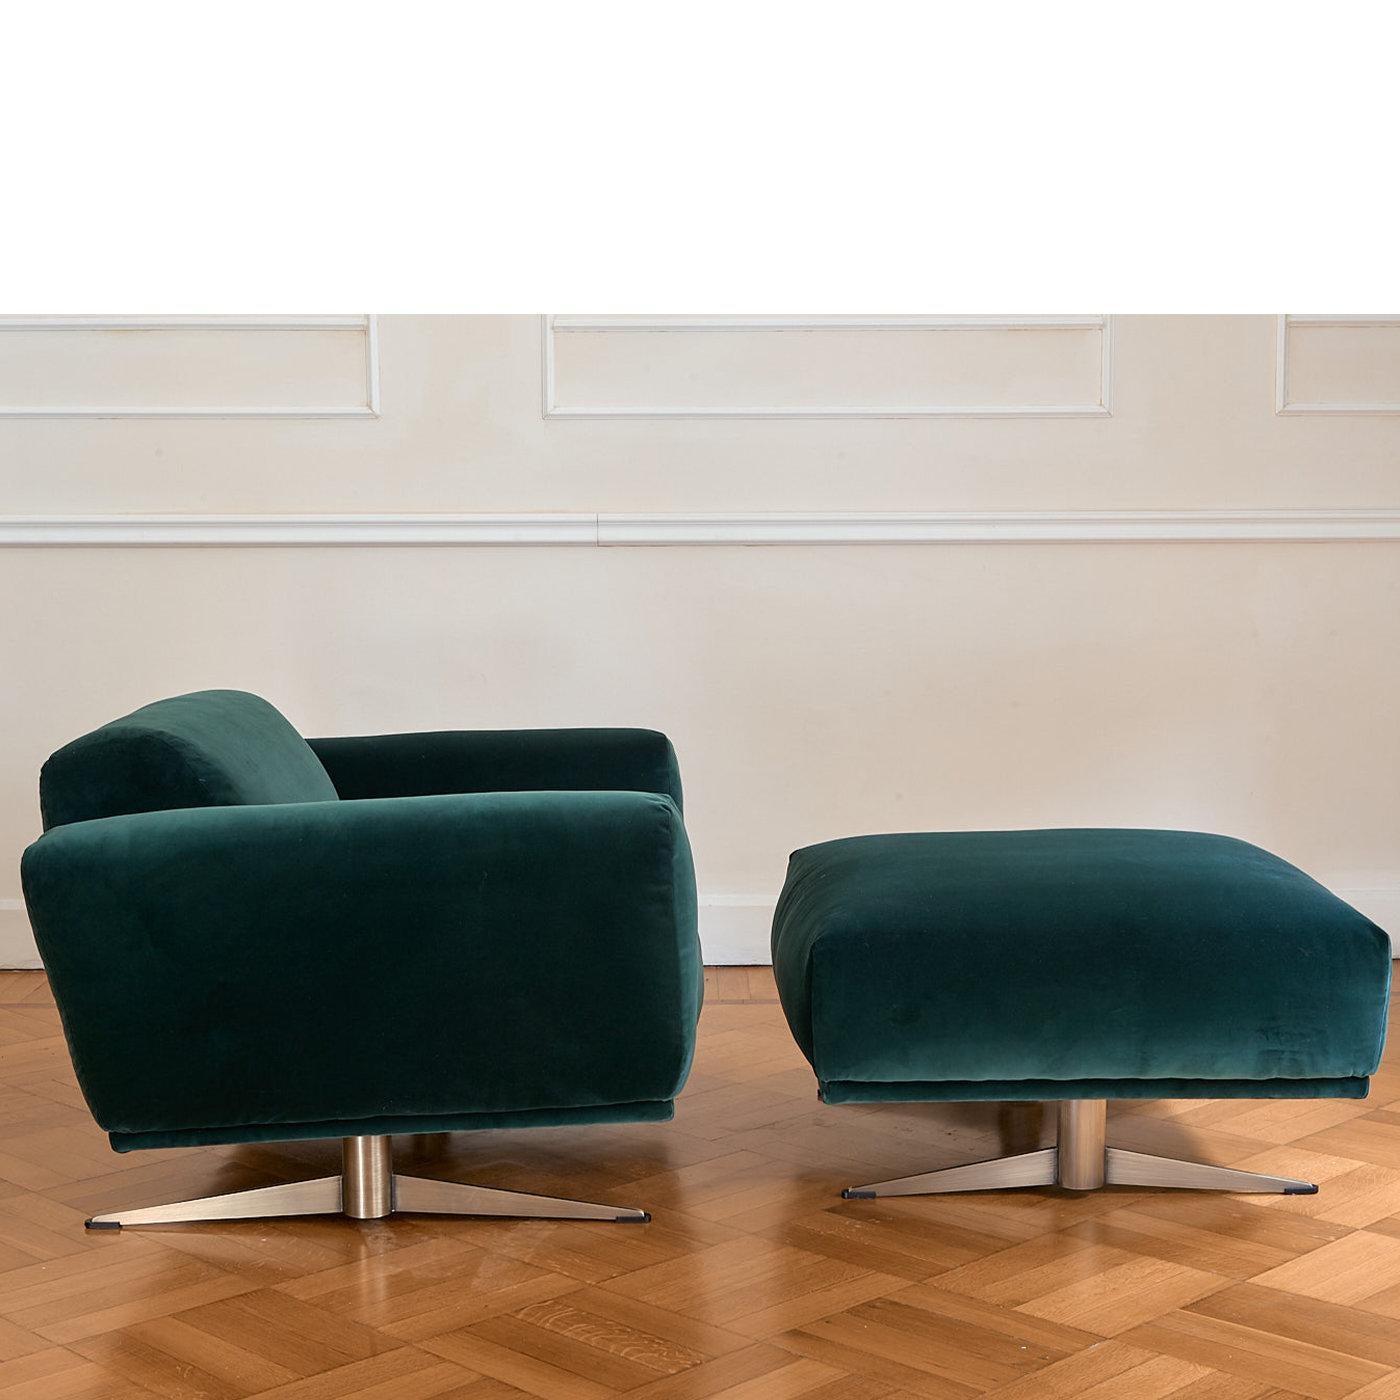 A stylish design sure to bring character into any interior, this armchair will make a spot-on pairing if displayed with its matching pouf counterpart. The minimalist wooden frame is generously padded and covered in a velvety, emerald-hued fabric